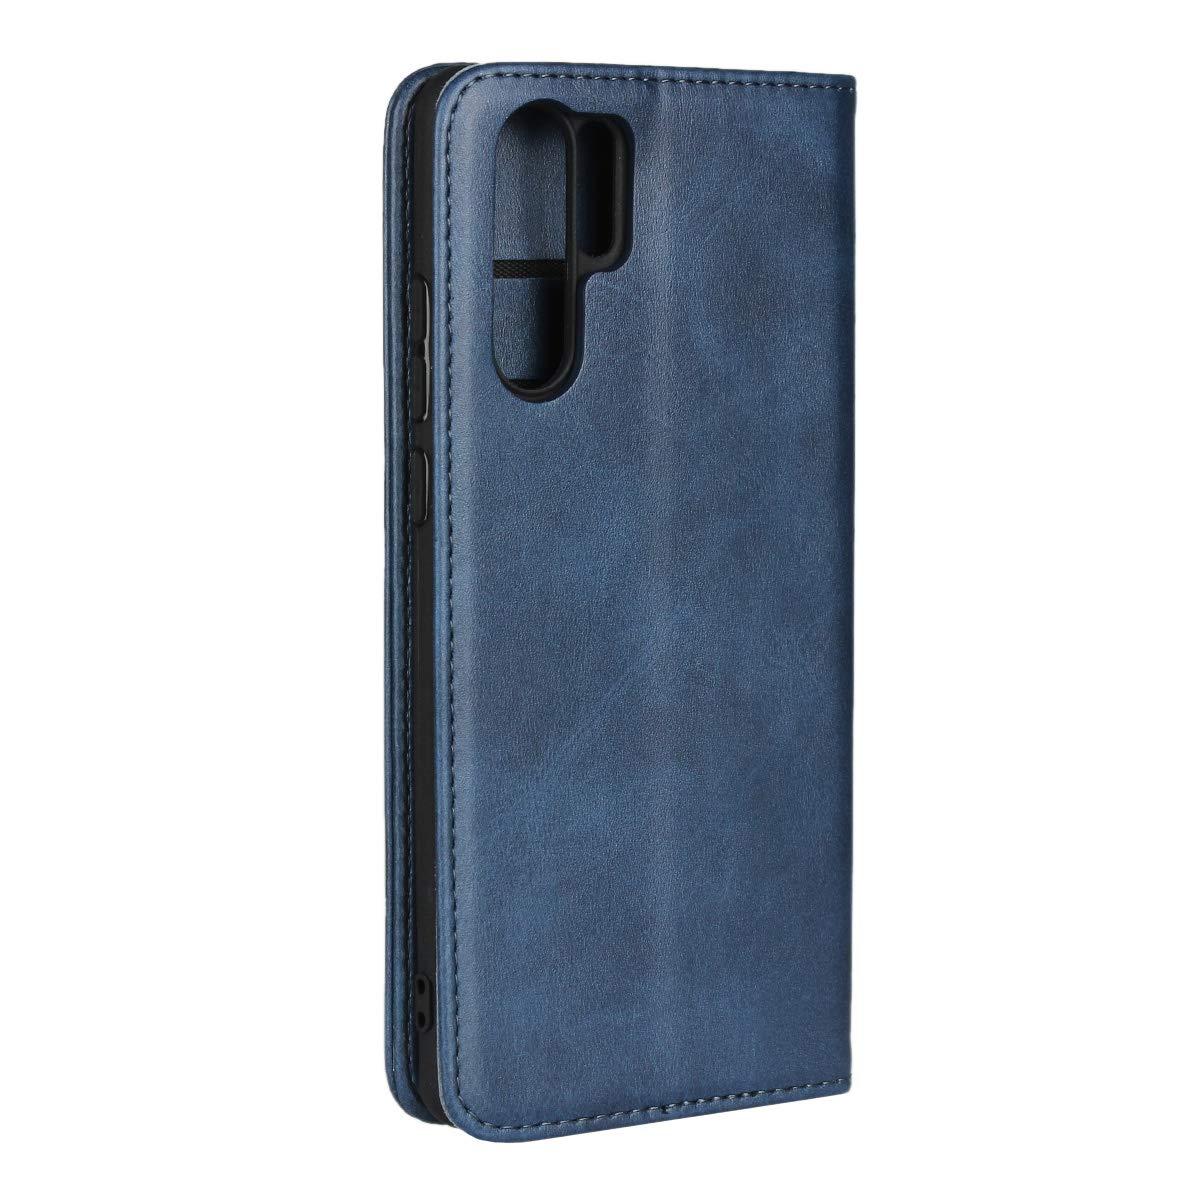 SailorTech Huawei P30 Pro Wallet Case, Premium PU Leather Case Flip Cases Folio Cover with Kickstand Card Slots Holder Strong Magnetic Closure Phone Case - Navy Blue 3